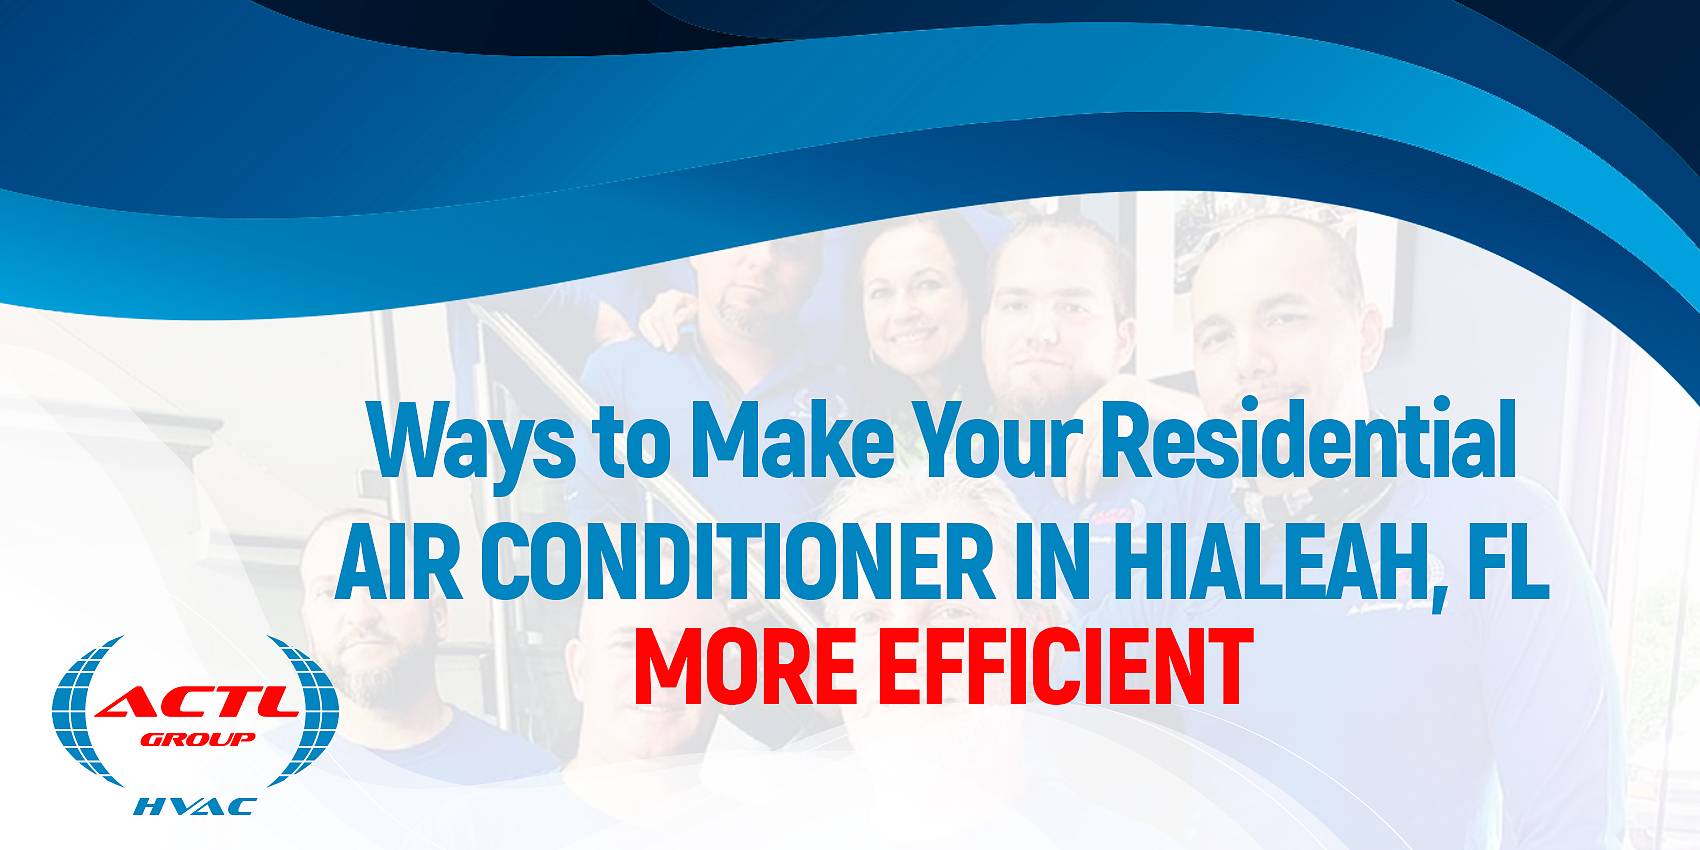 actl group Ways to Make Your Residential Air Conditioner in Hialeah, FL More Efficient